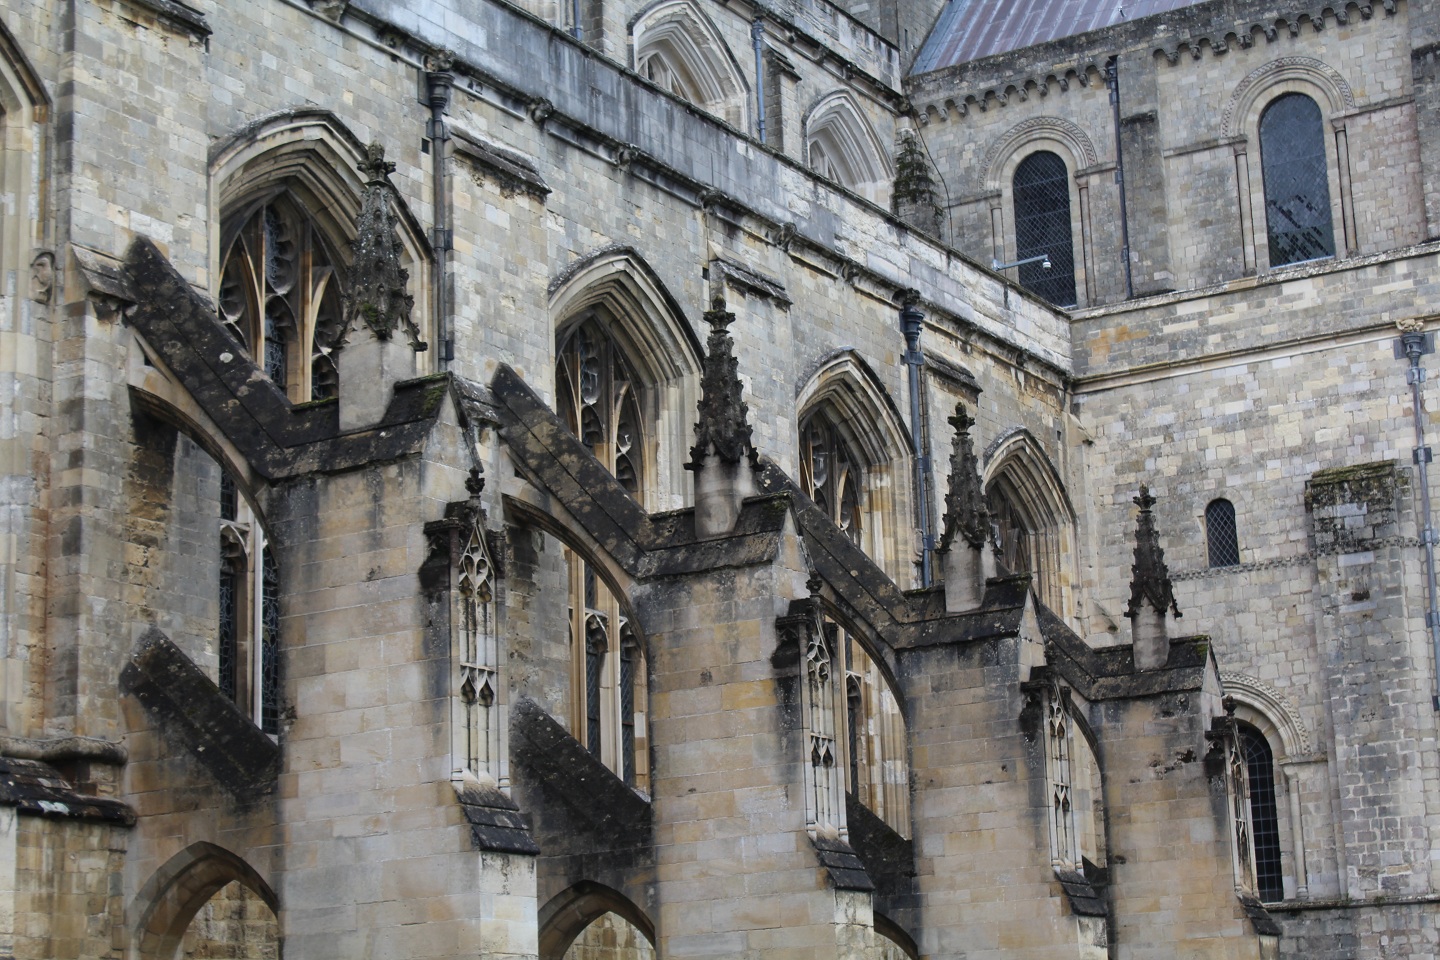 A view of the South side of Winchester Cathedral showing detail of the stonework